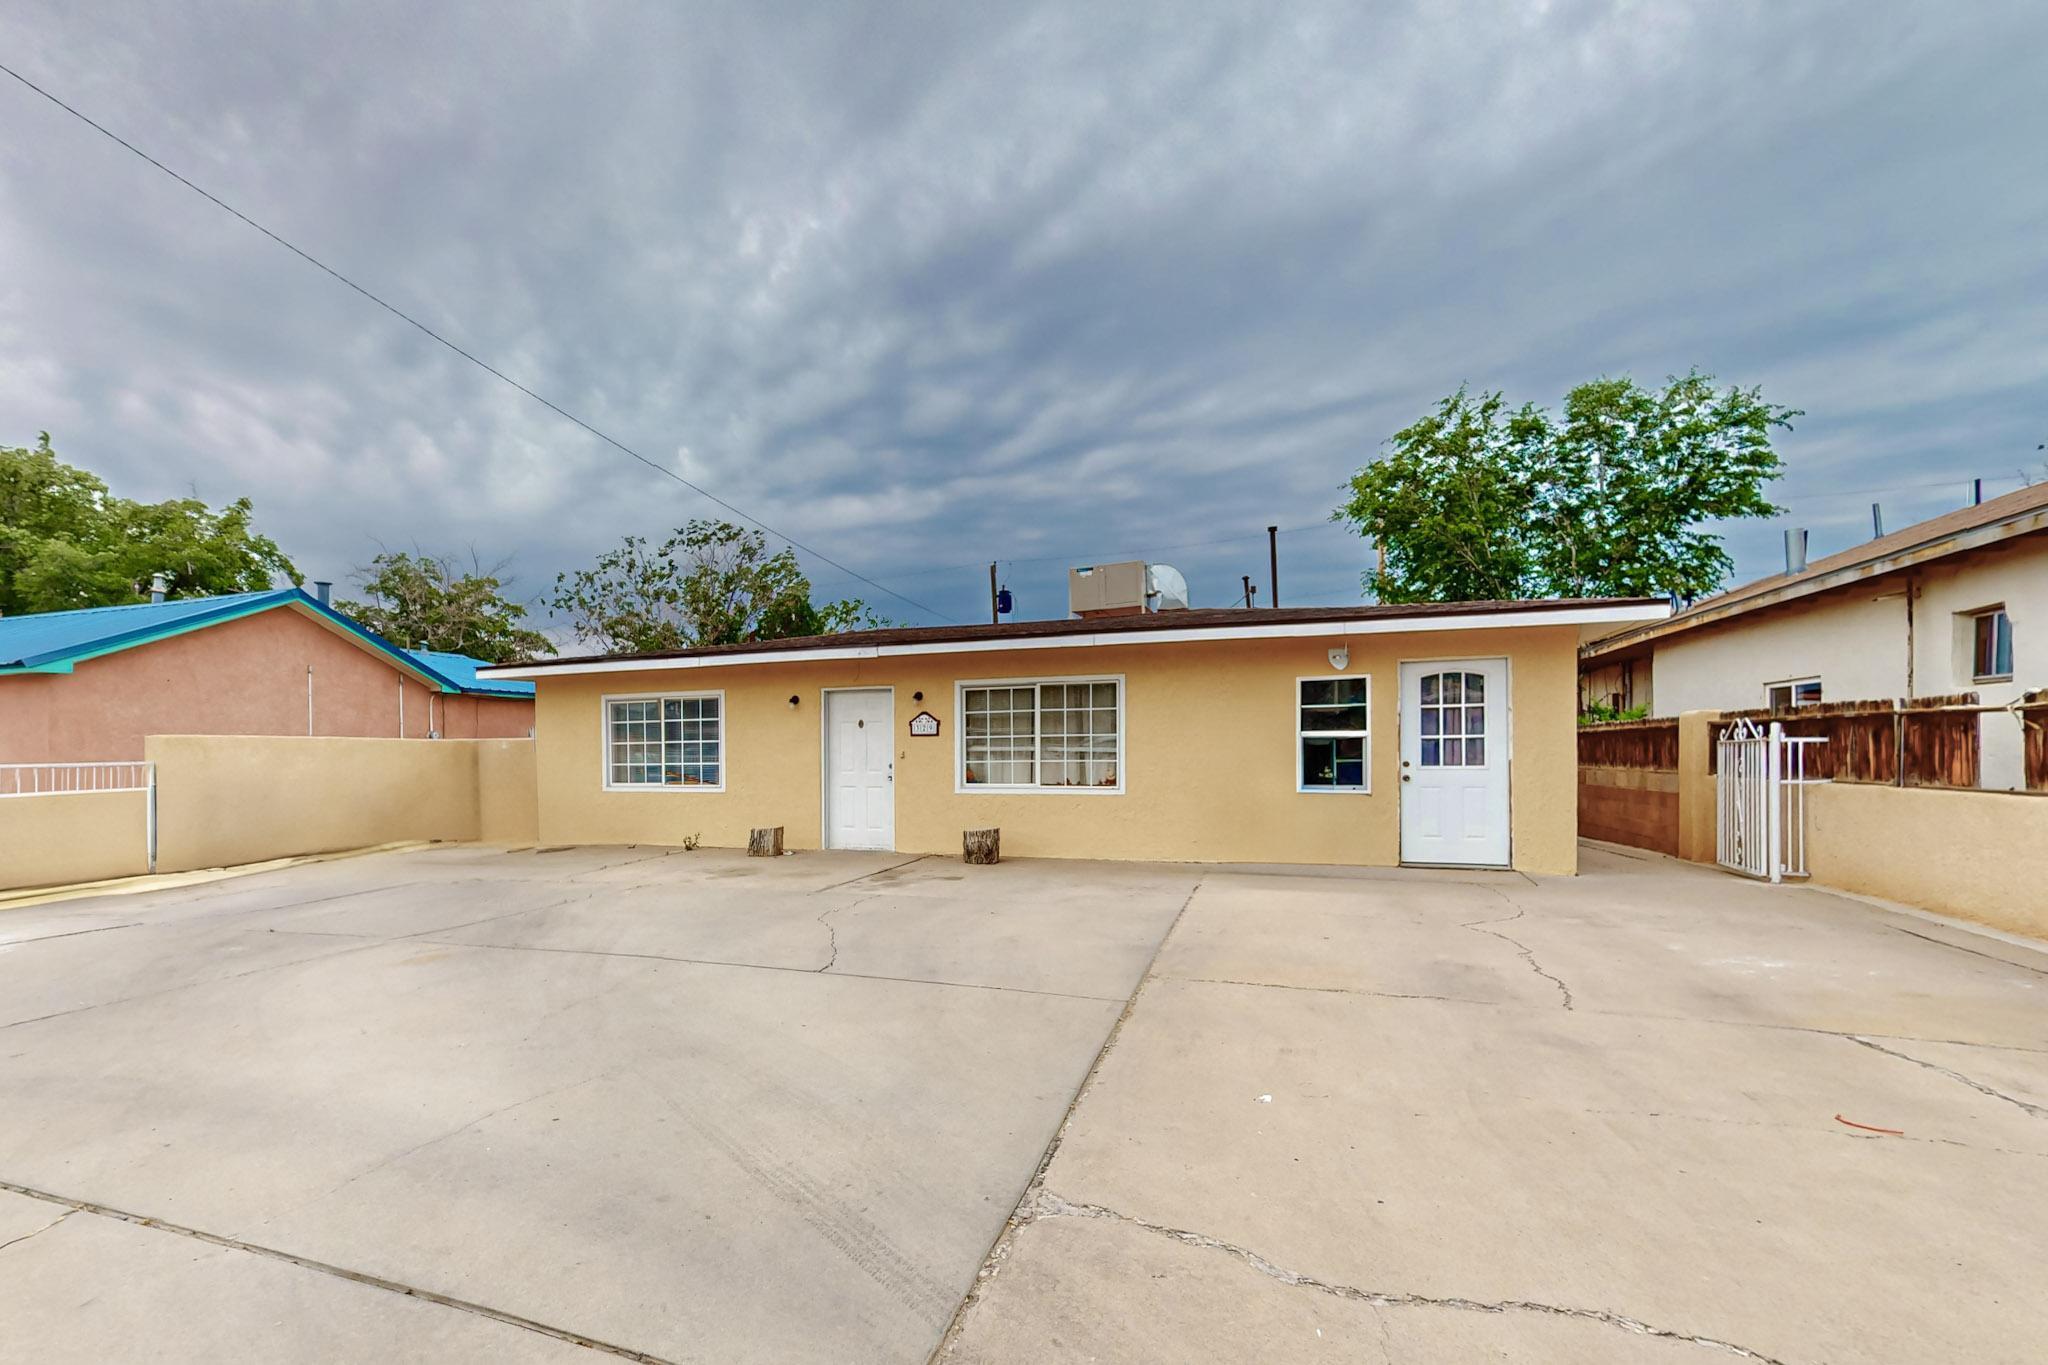 Nice Home with a full 976 sqft casita, home is walled front and back. Main house roof was replaced 3 months ago,